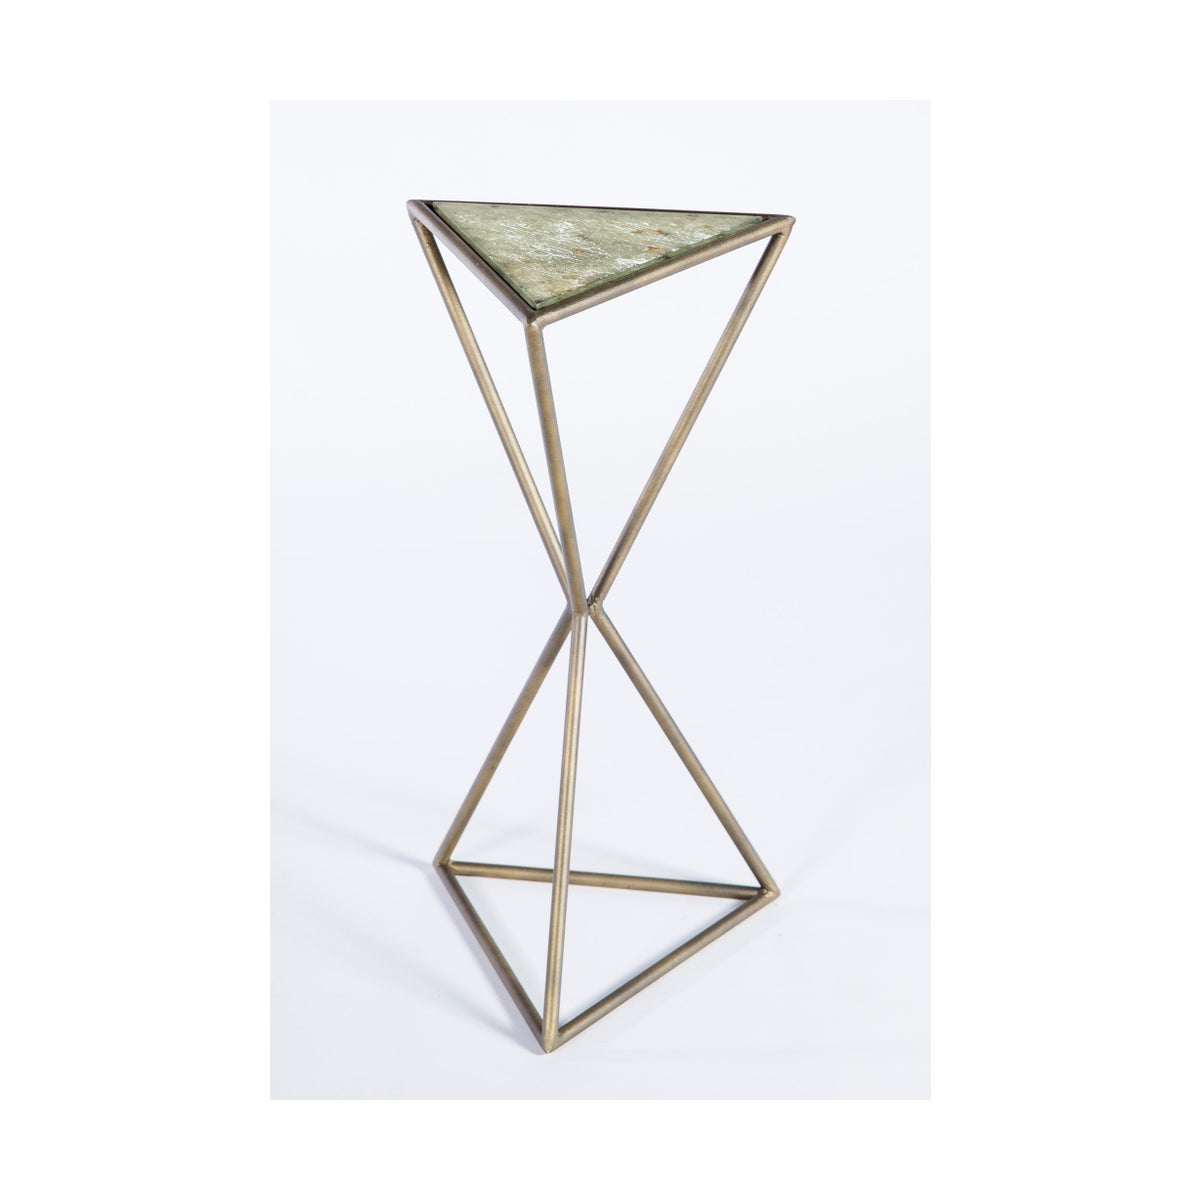 Triangle Accent Table in Antique Brass with Top in Adobe Dust Finish